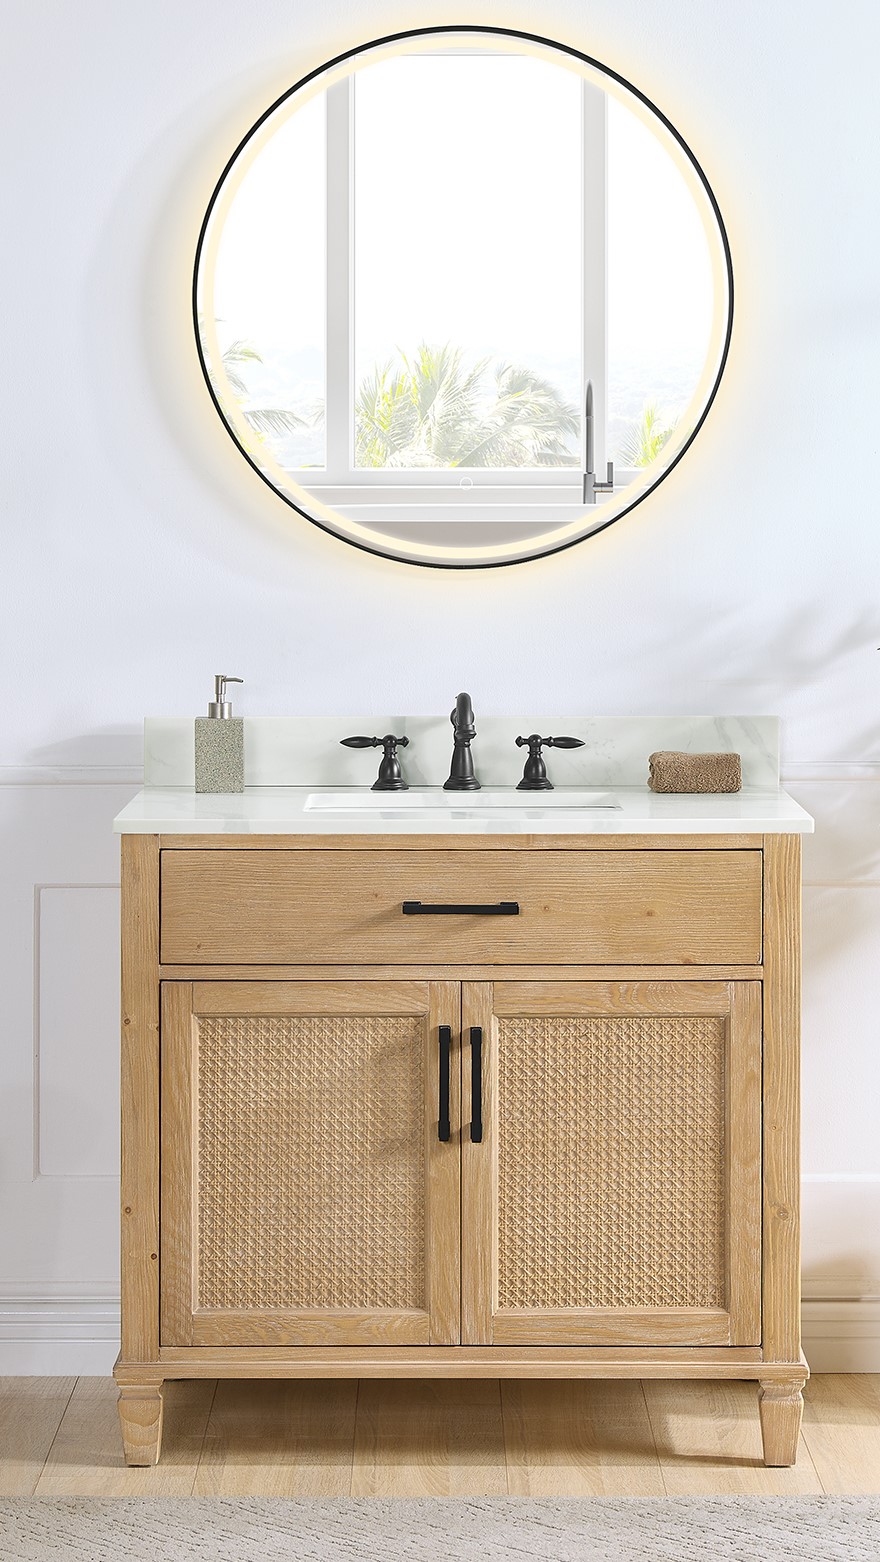 Issac Edwards 36" Single Bathroom Vanity in Weathered Fir with Calacatta White Quartz Stone Countertop with Mirror